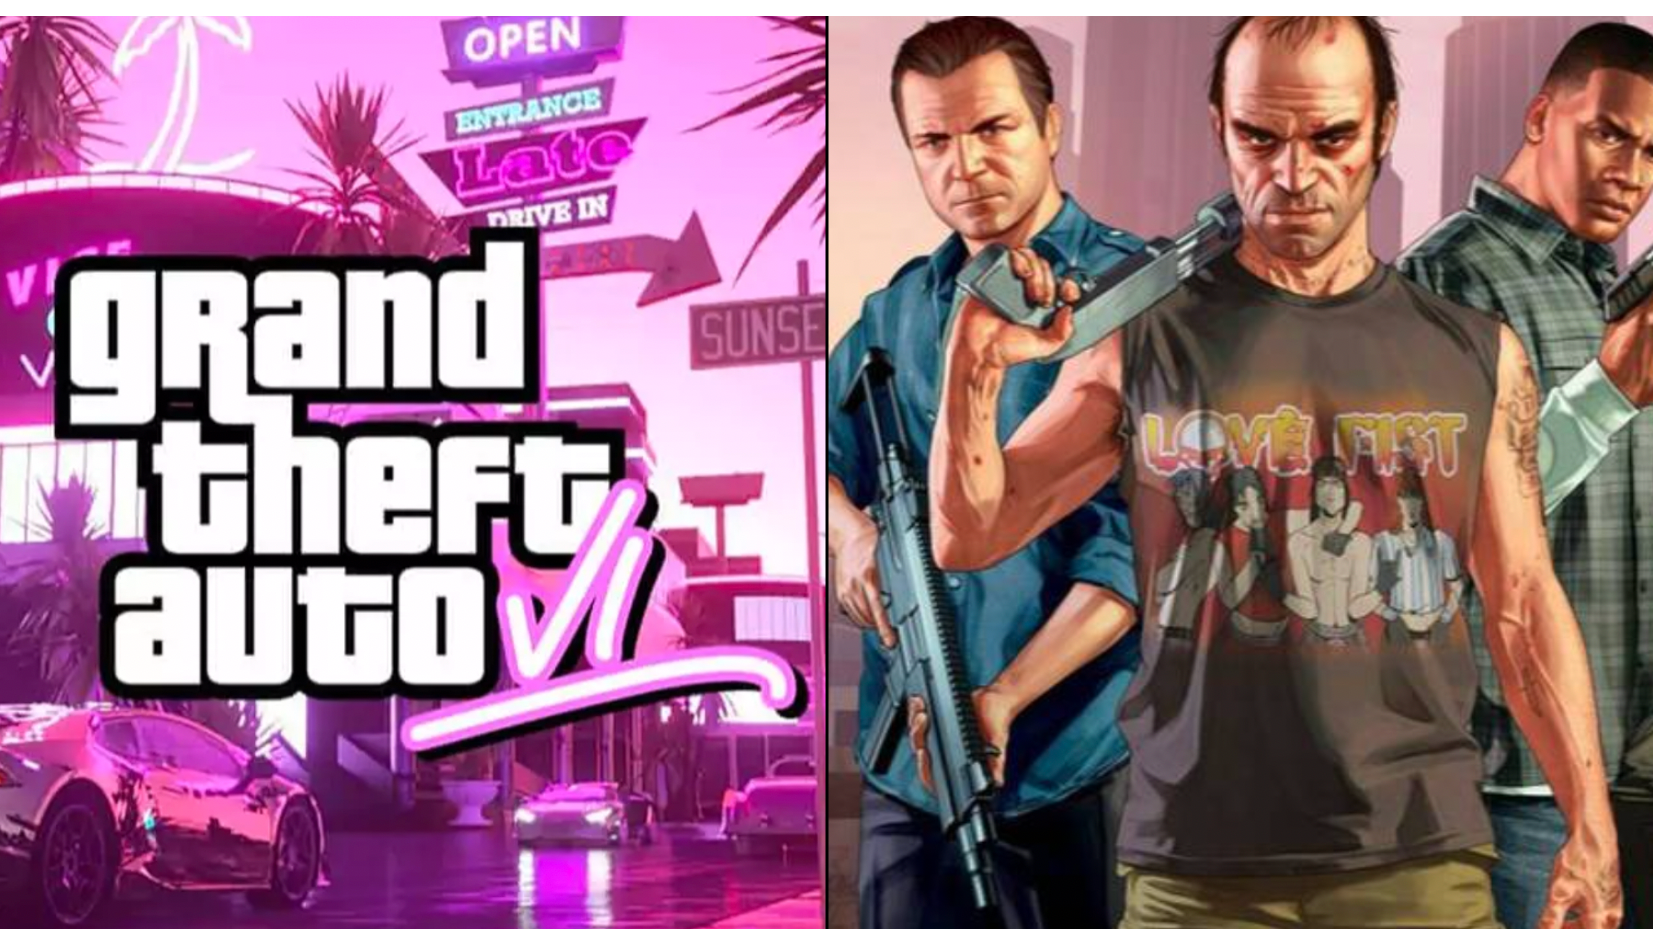 Next Grand Theft Auto Installment Officially Confirmed